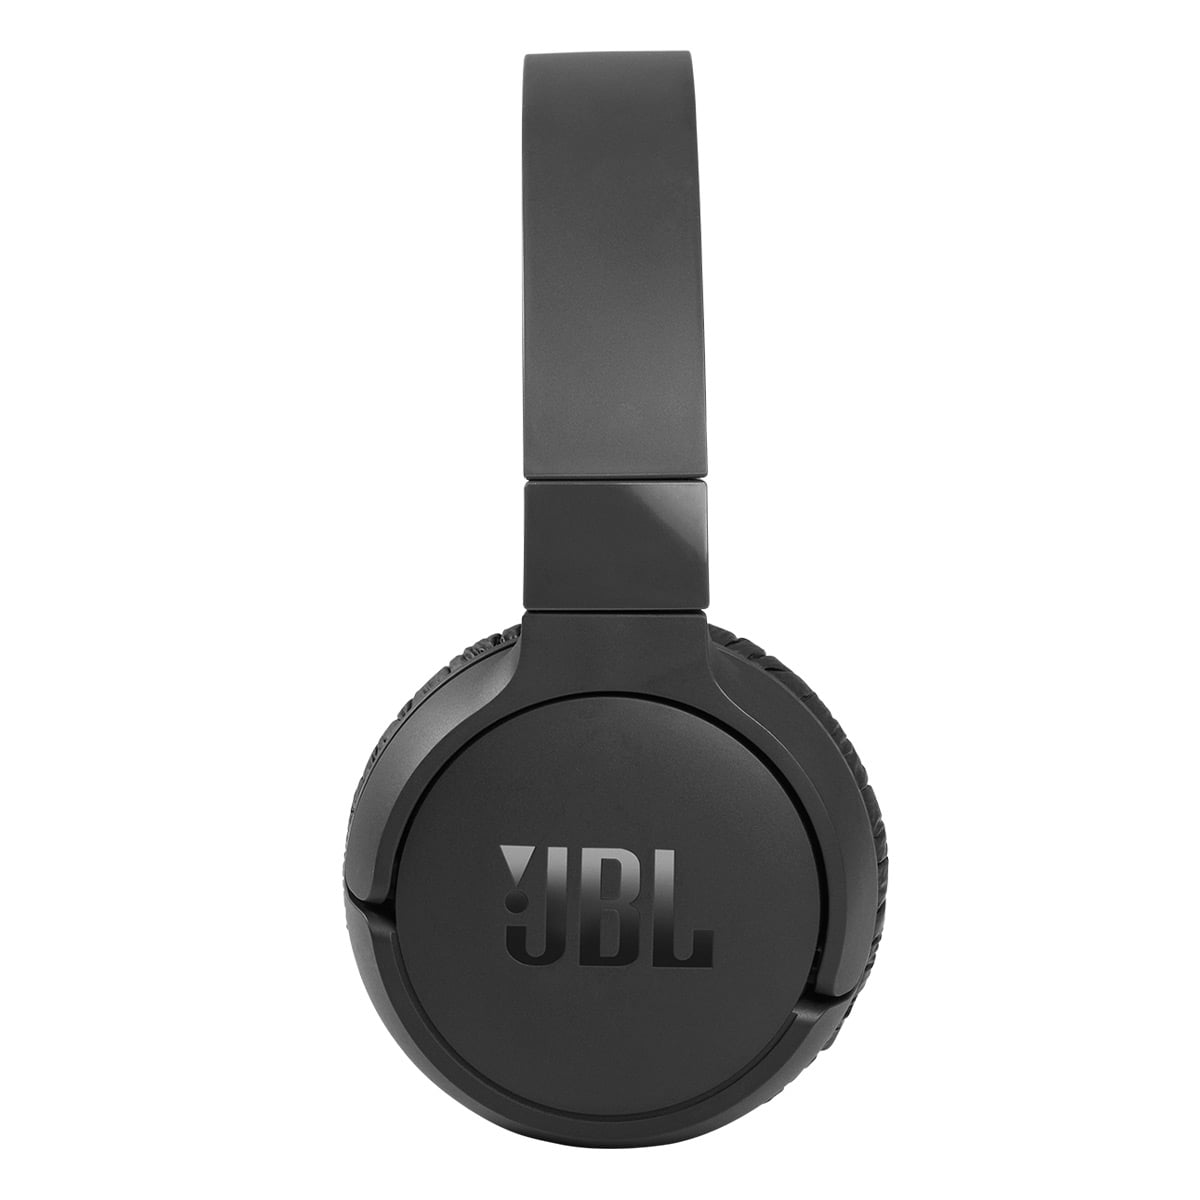 JBL Tune 660NC: Wireless On-Ear Headphones with Active Noise Cancellation -  Black and InfinityLab InstantCharger 20W 1 USB Compact USB-C PD Charger